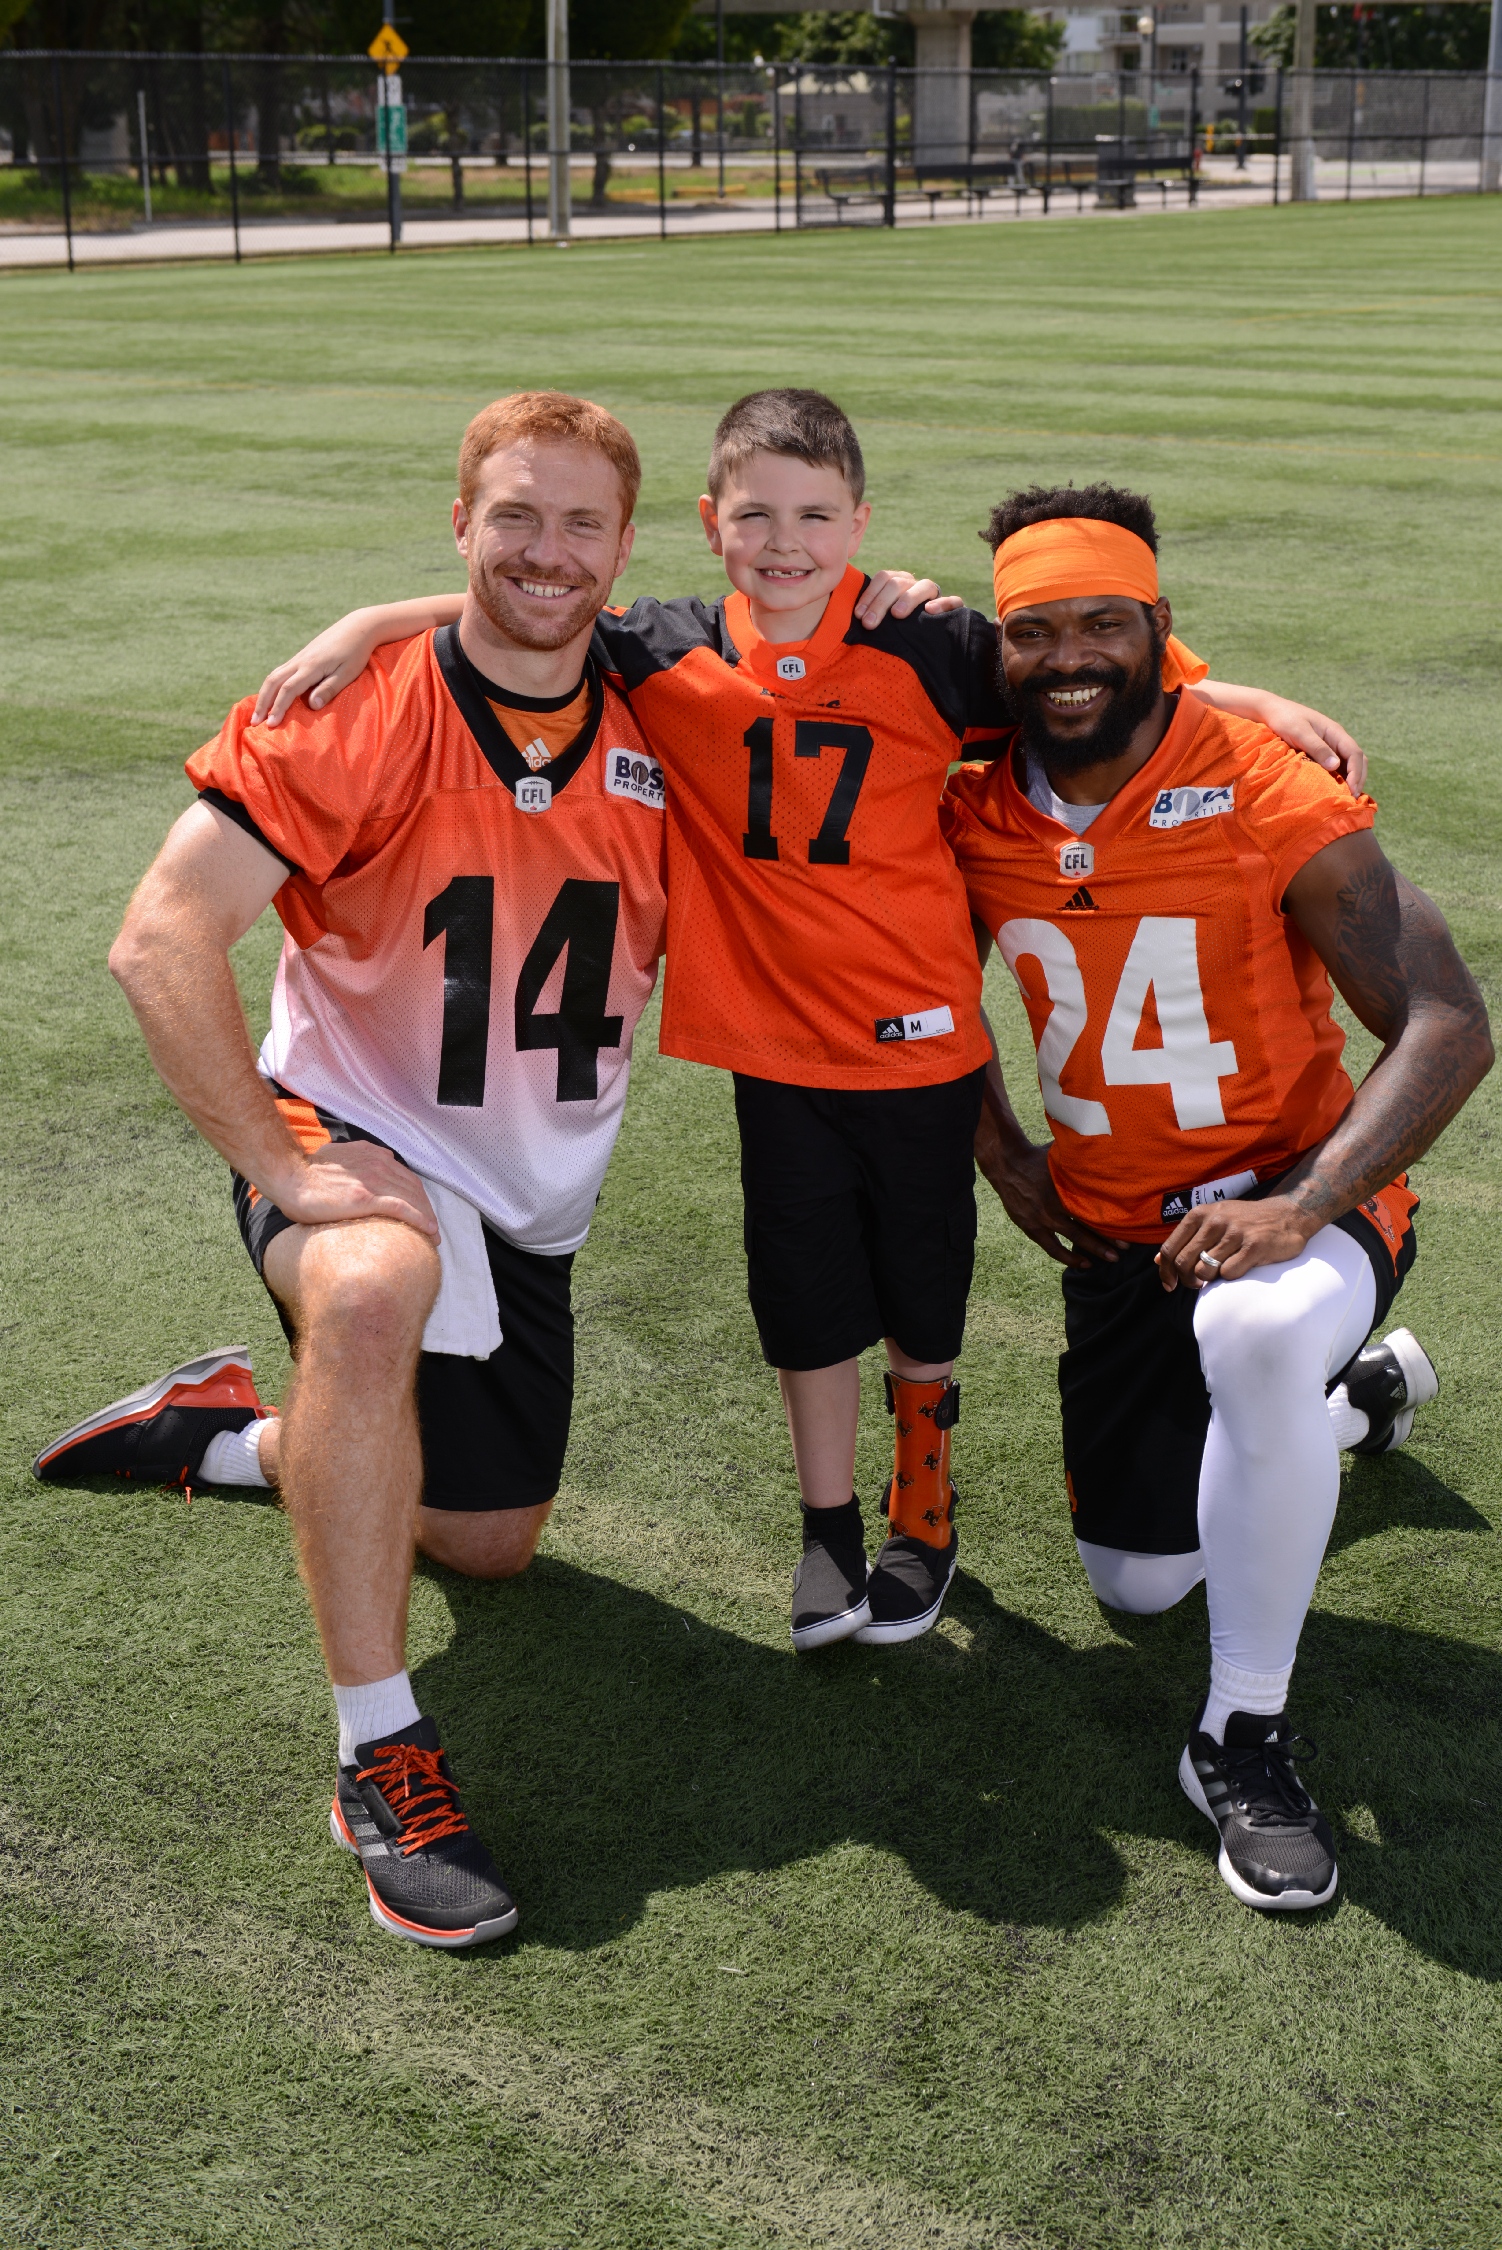 Darevin teams up with BC Lions players Travis Lulay (#14) and Jeremiah Johnson (#24).